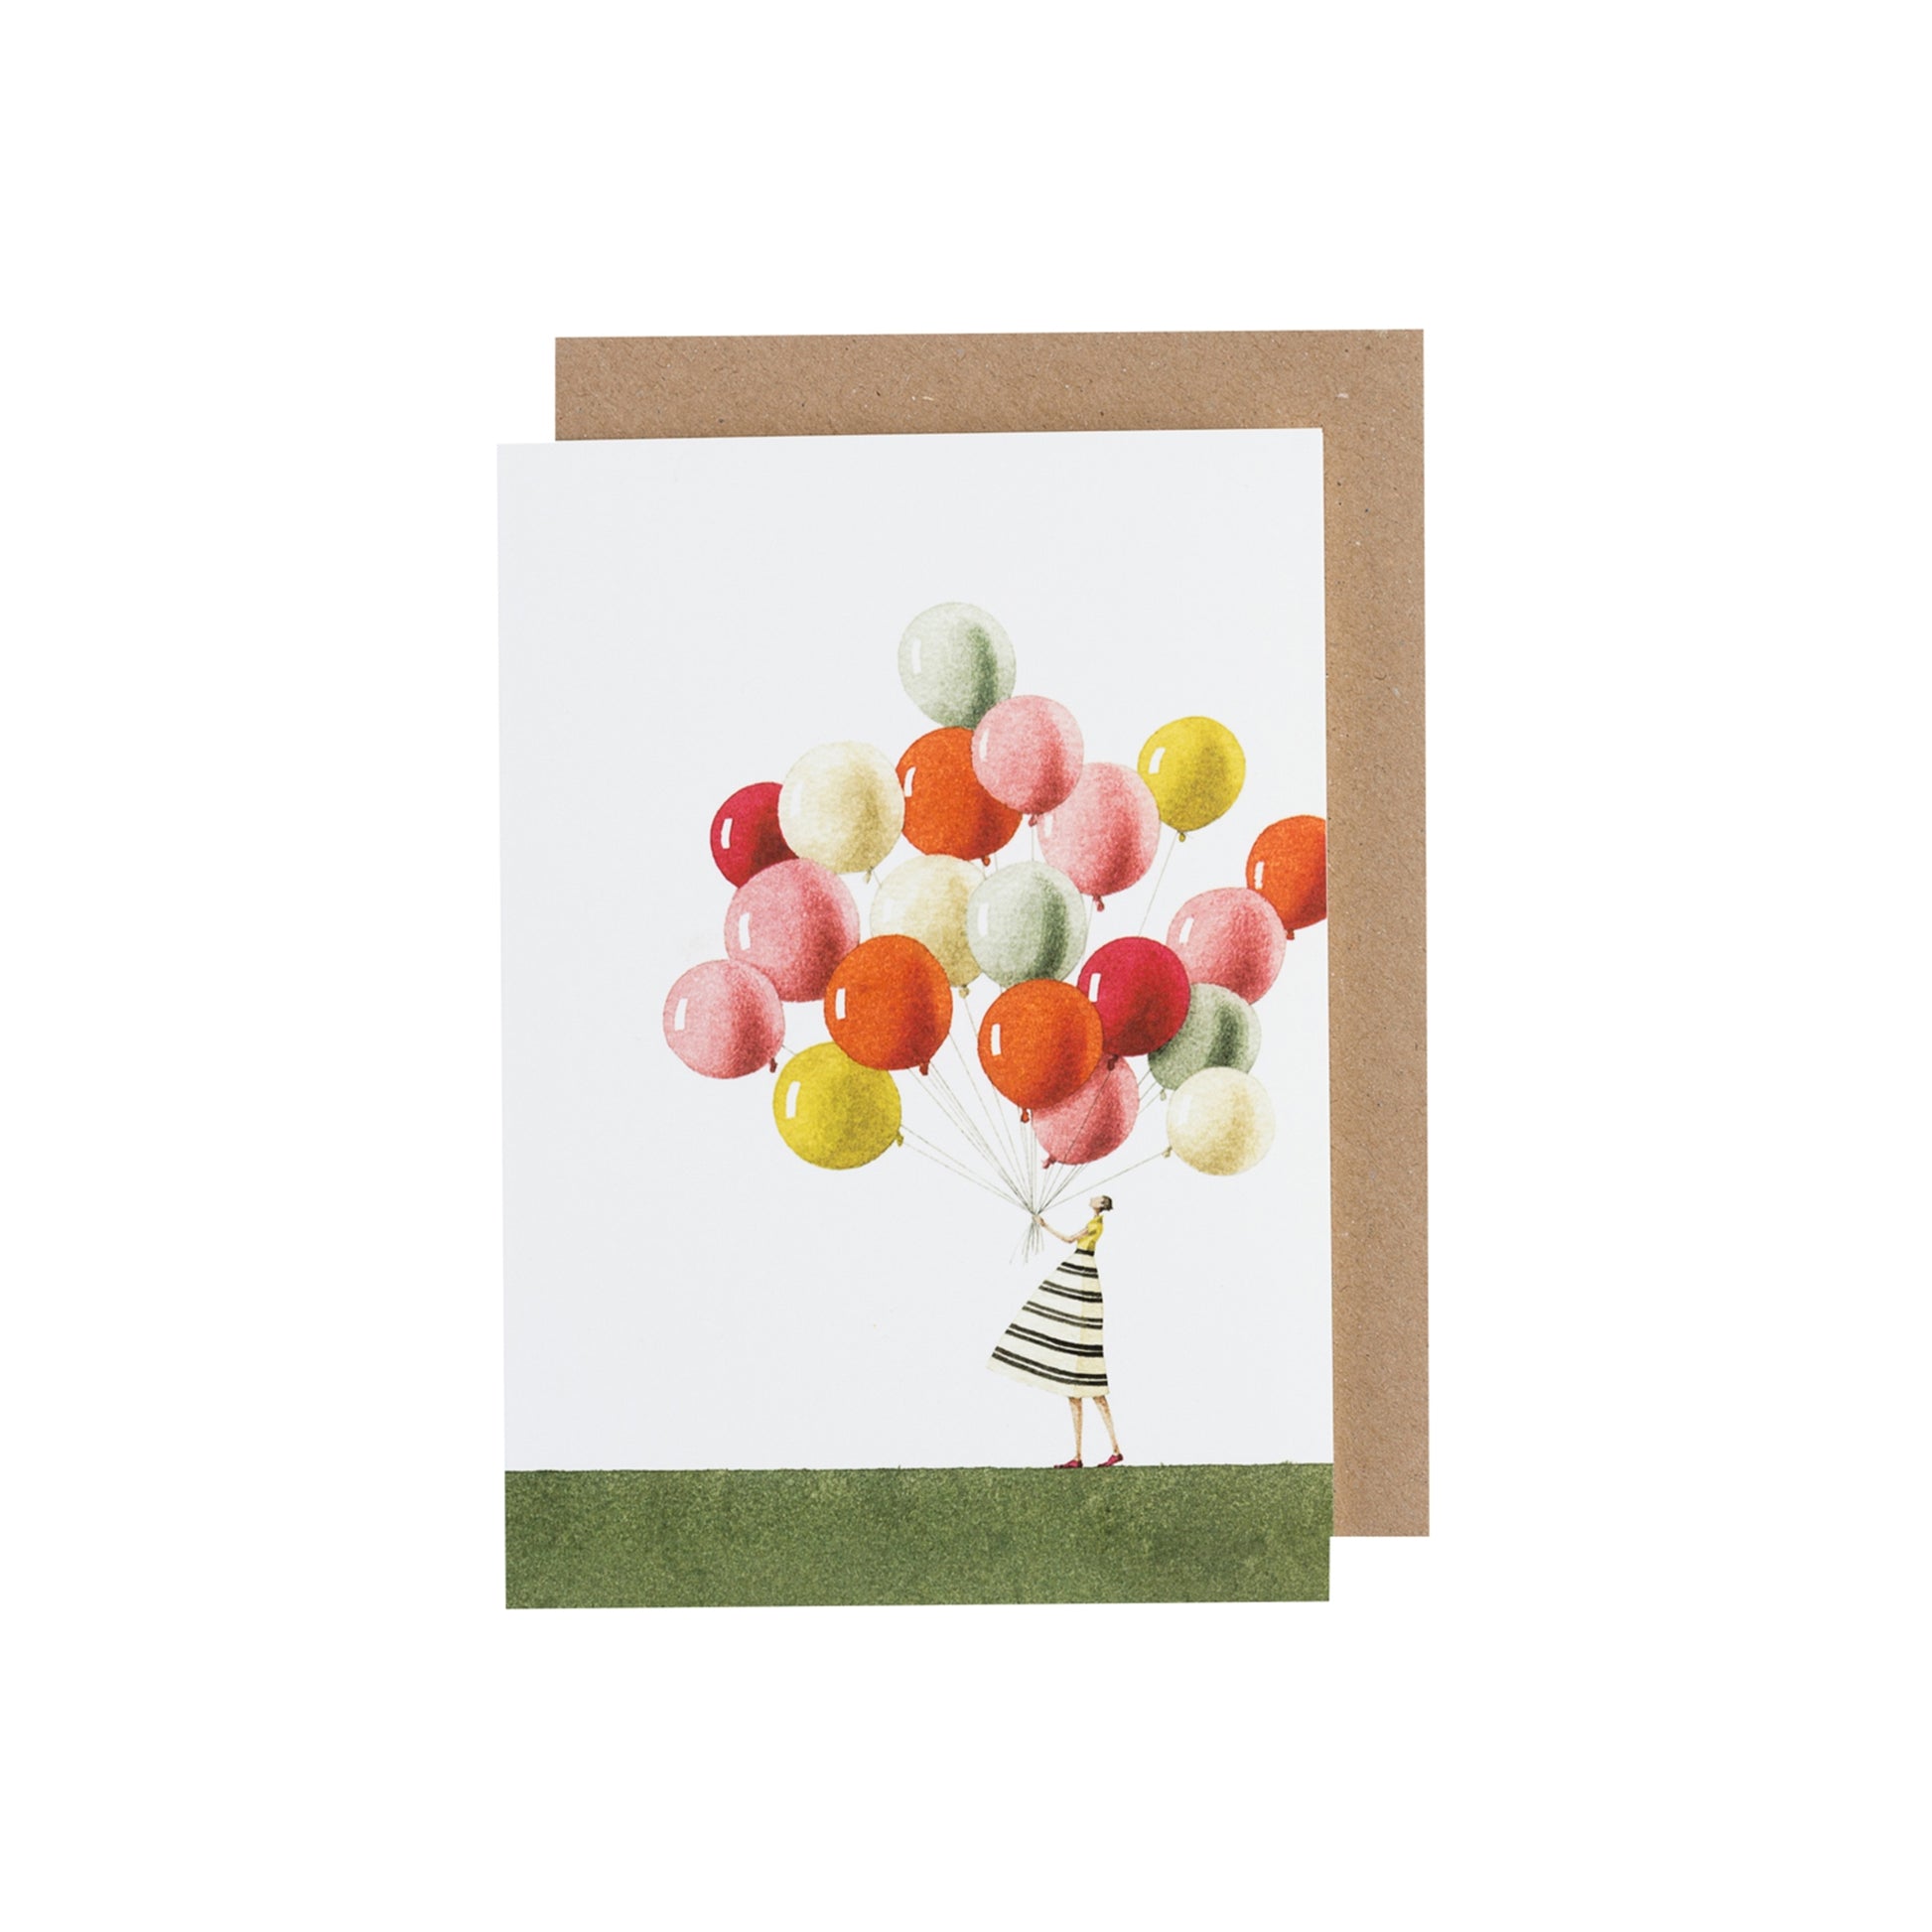 A image of the greeting card "Balloons" showing a woman in a dress holding an oversized bunch of colored balloons.